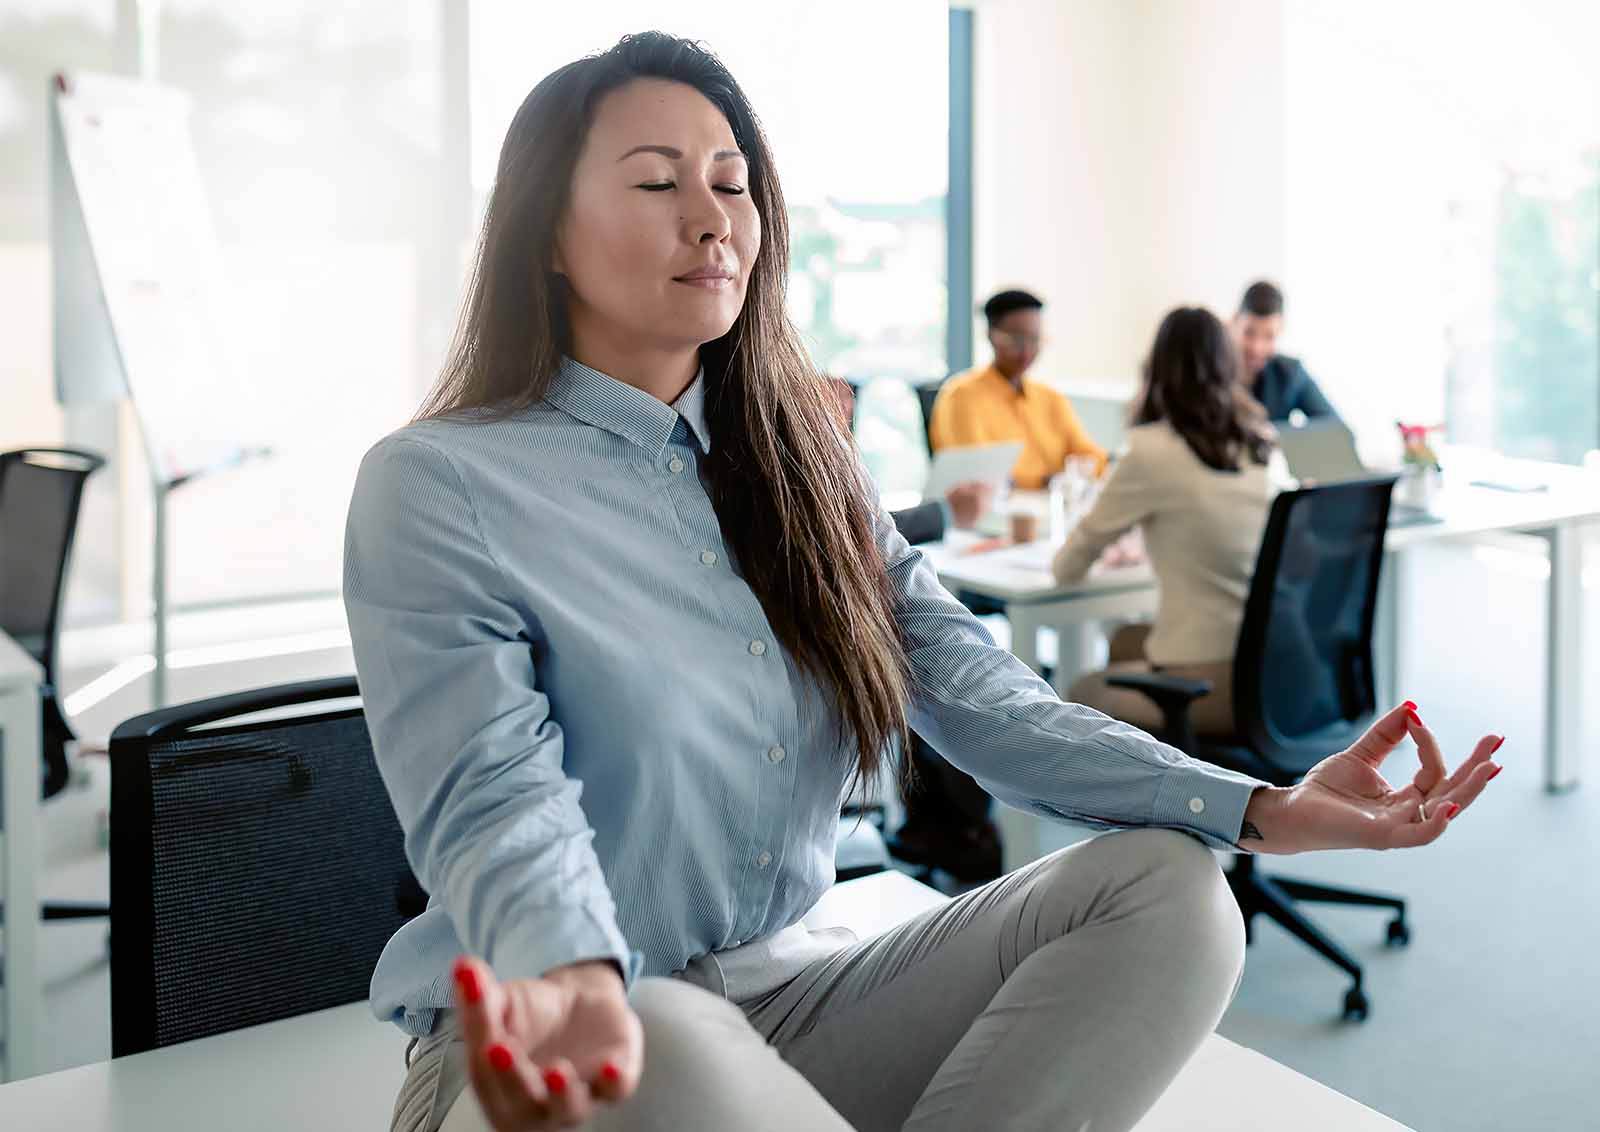 A woman meditates on a table in an office setting while a meeting is being held.